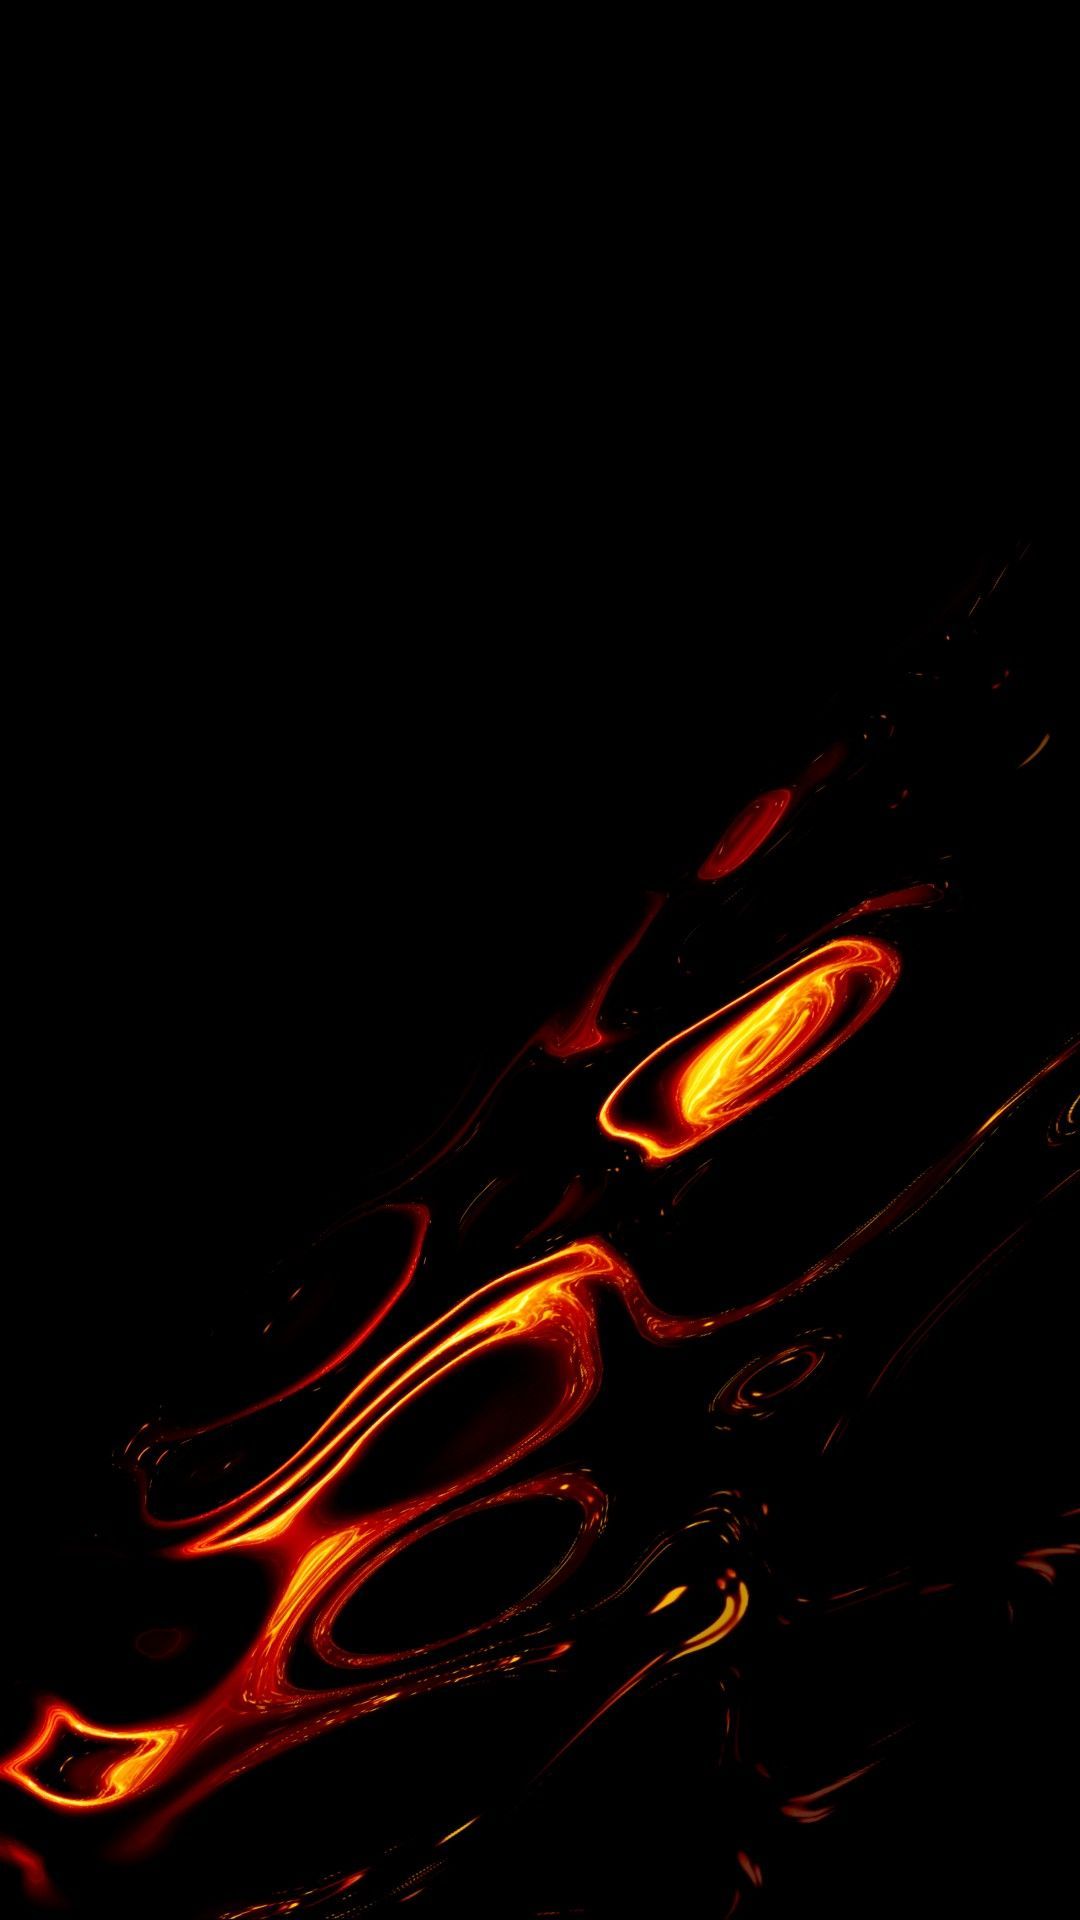 Black AMOLED Wallpaper, Download From WallPixel Android App. App